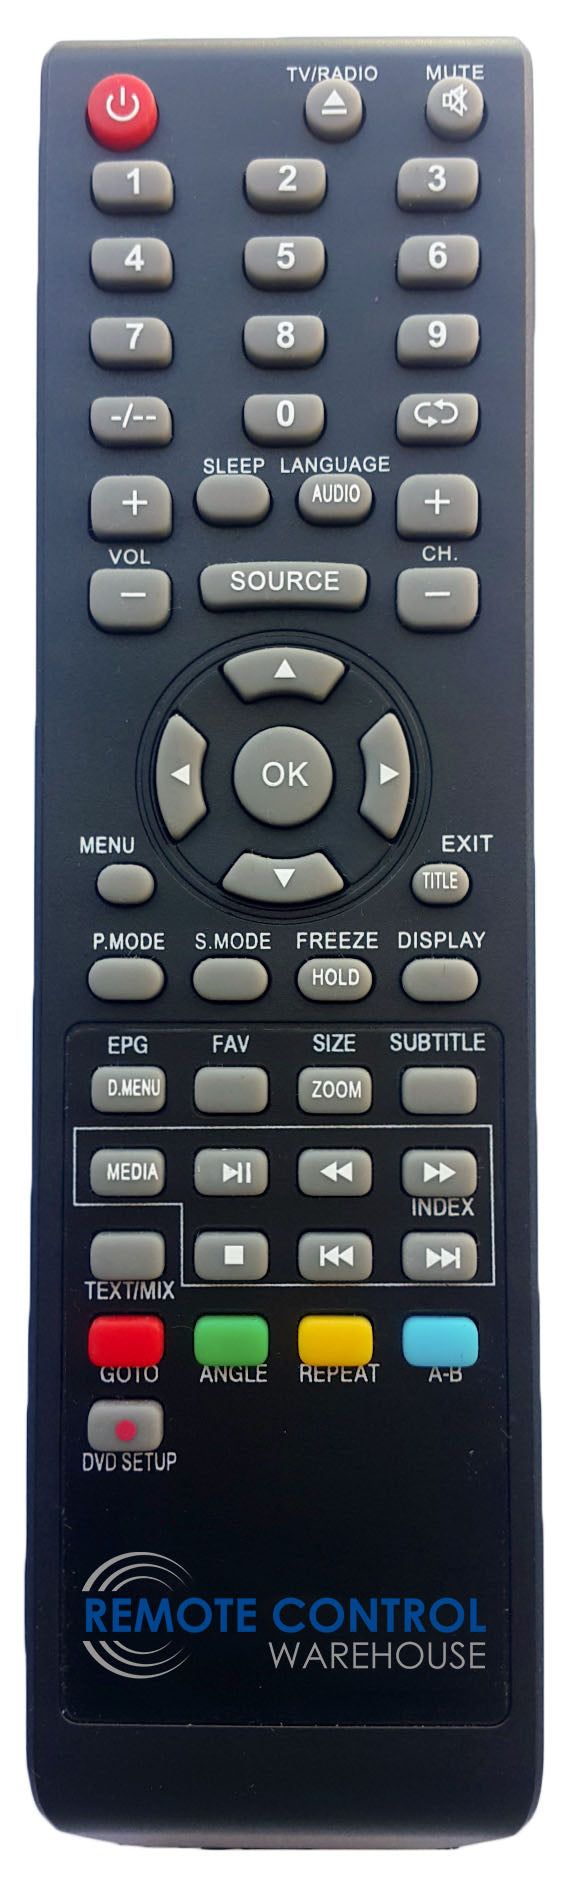 REPLACEMENT REGAL REMOTE CONTROL - ATV-50FHD1 LCD TV